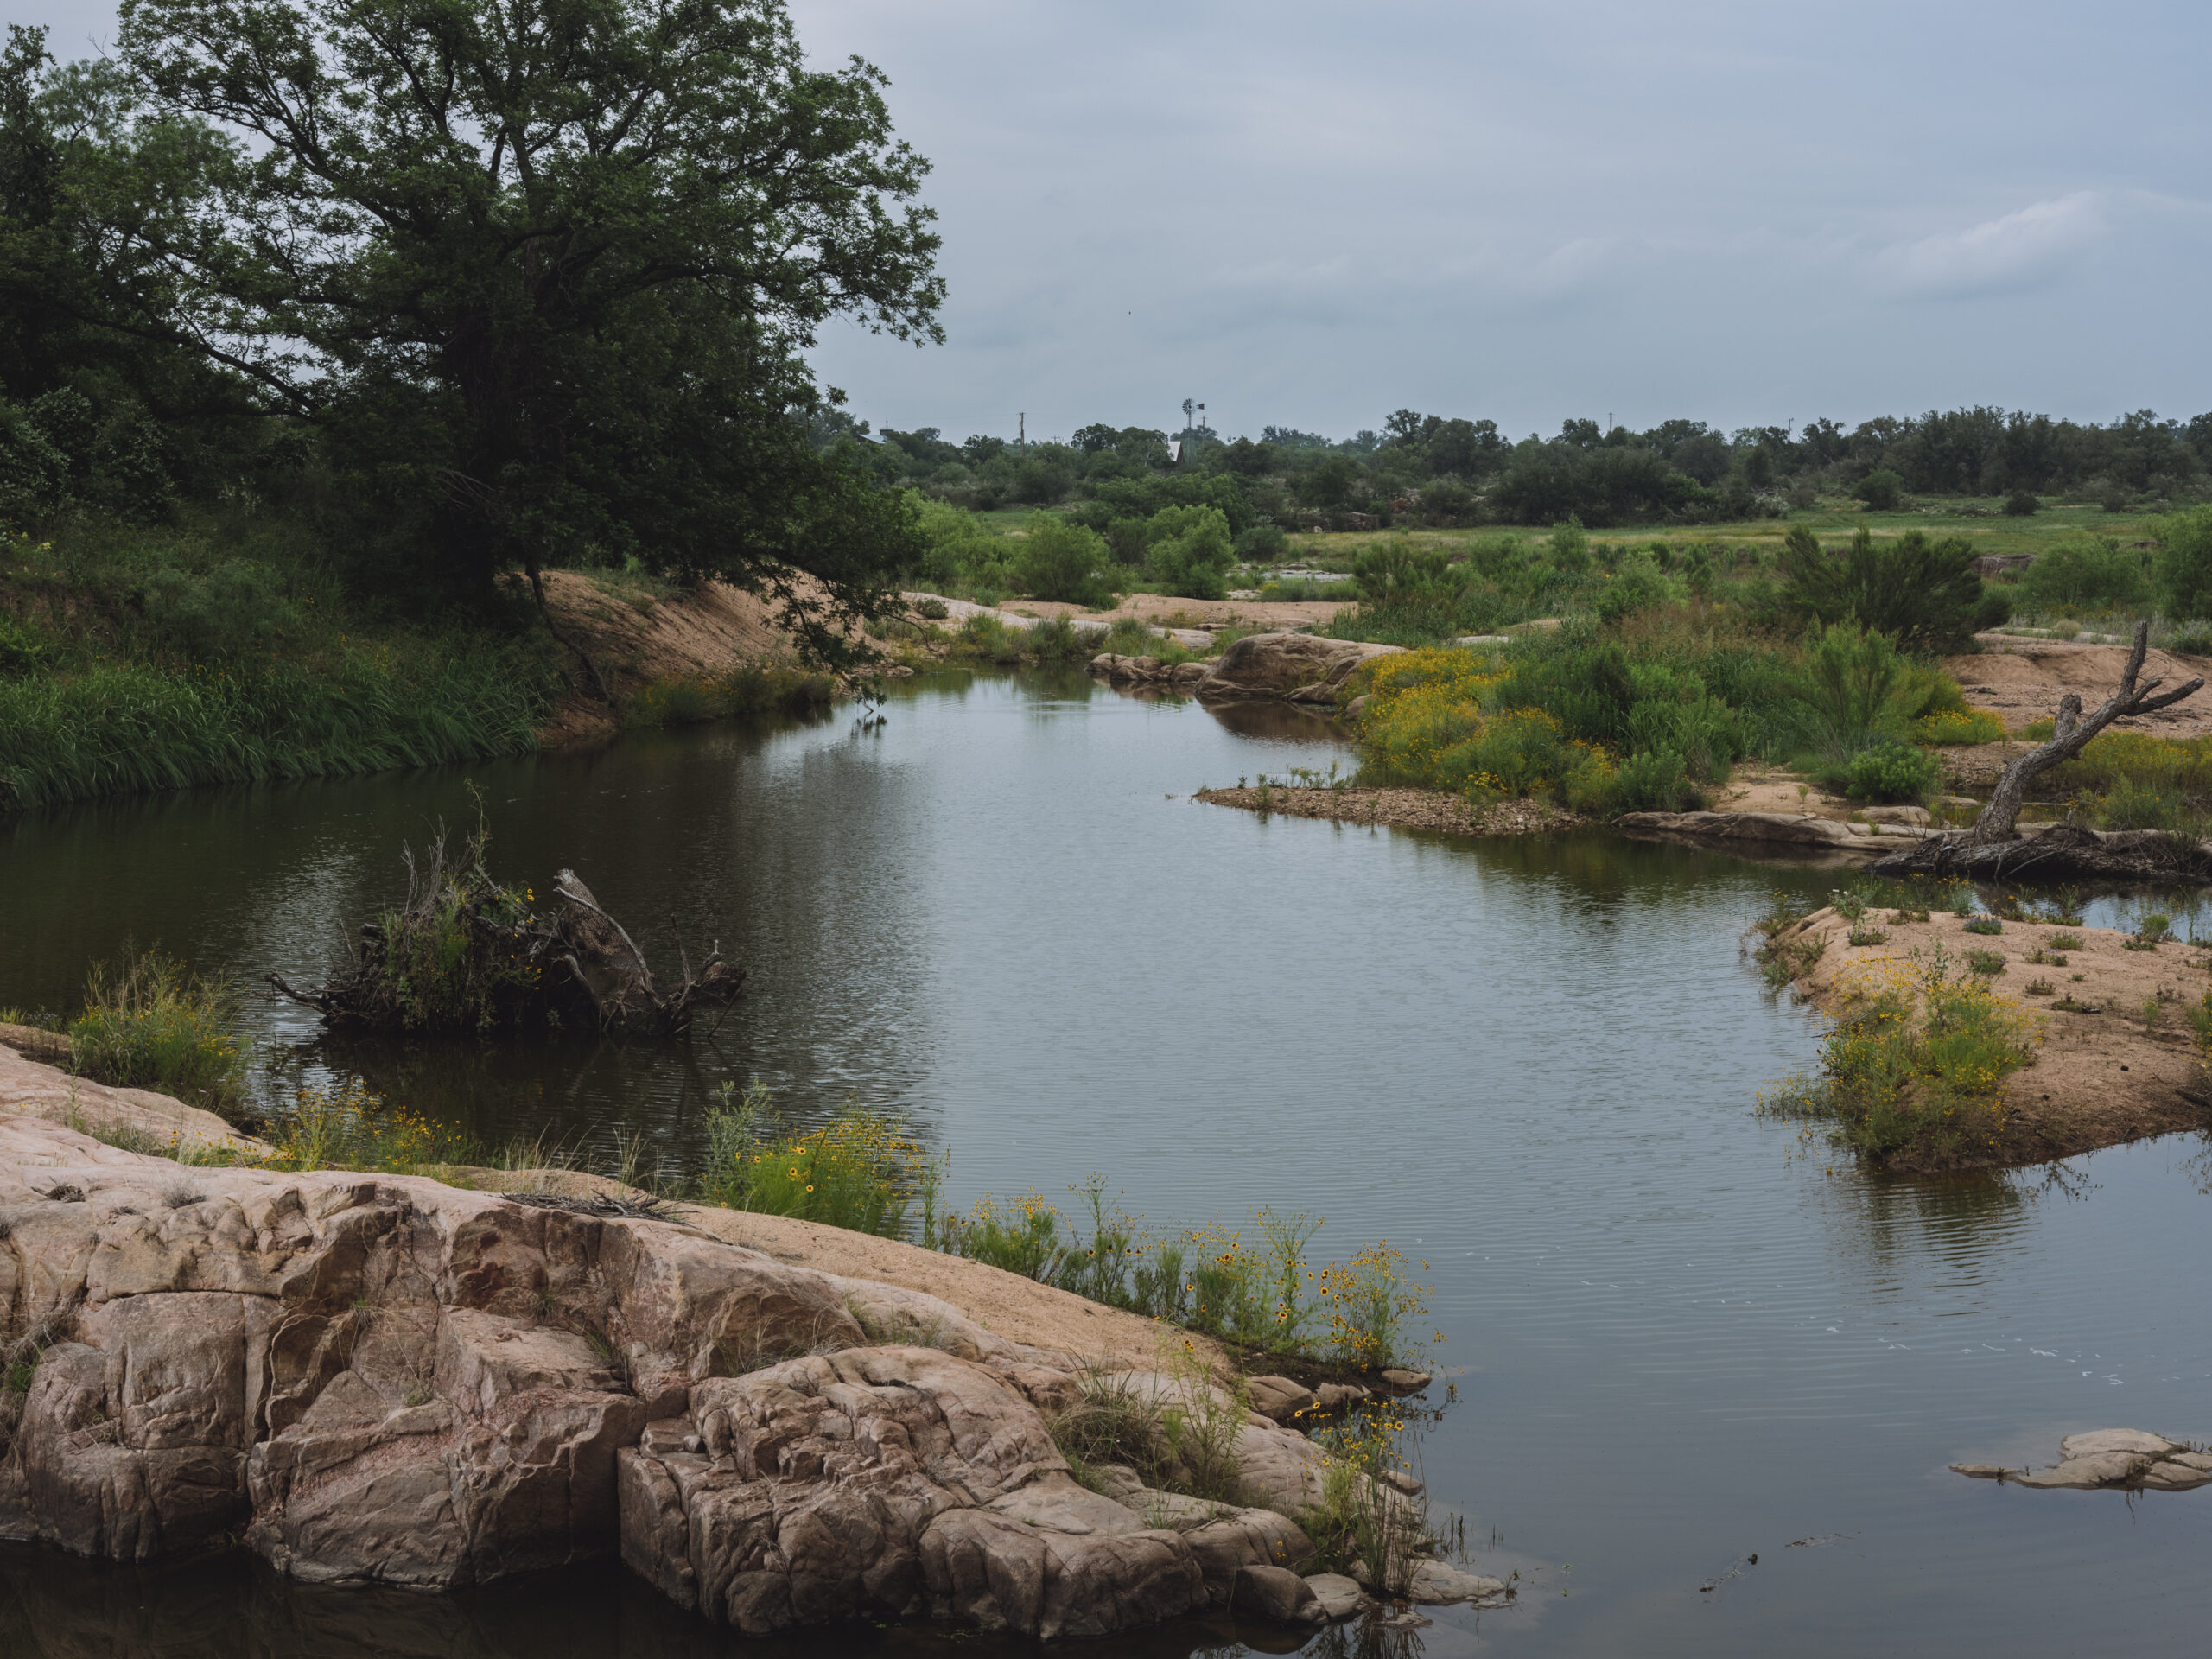 A photo of the winding path the rocky banks of the Llano river makes through the Texas Hill Country.